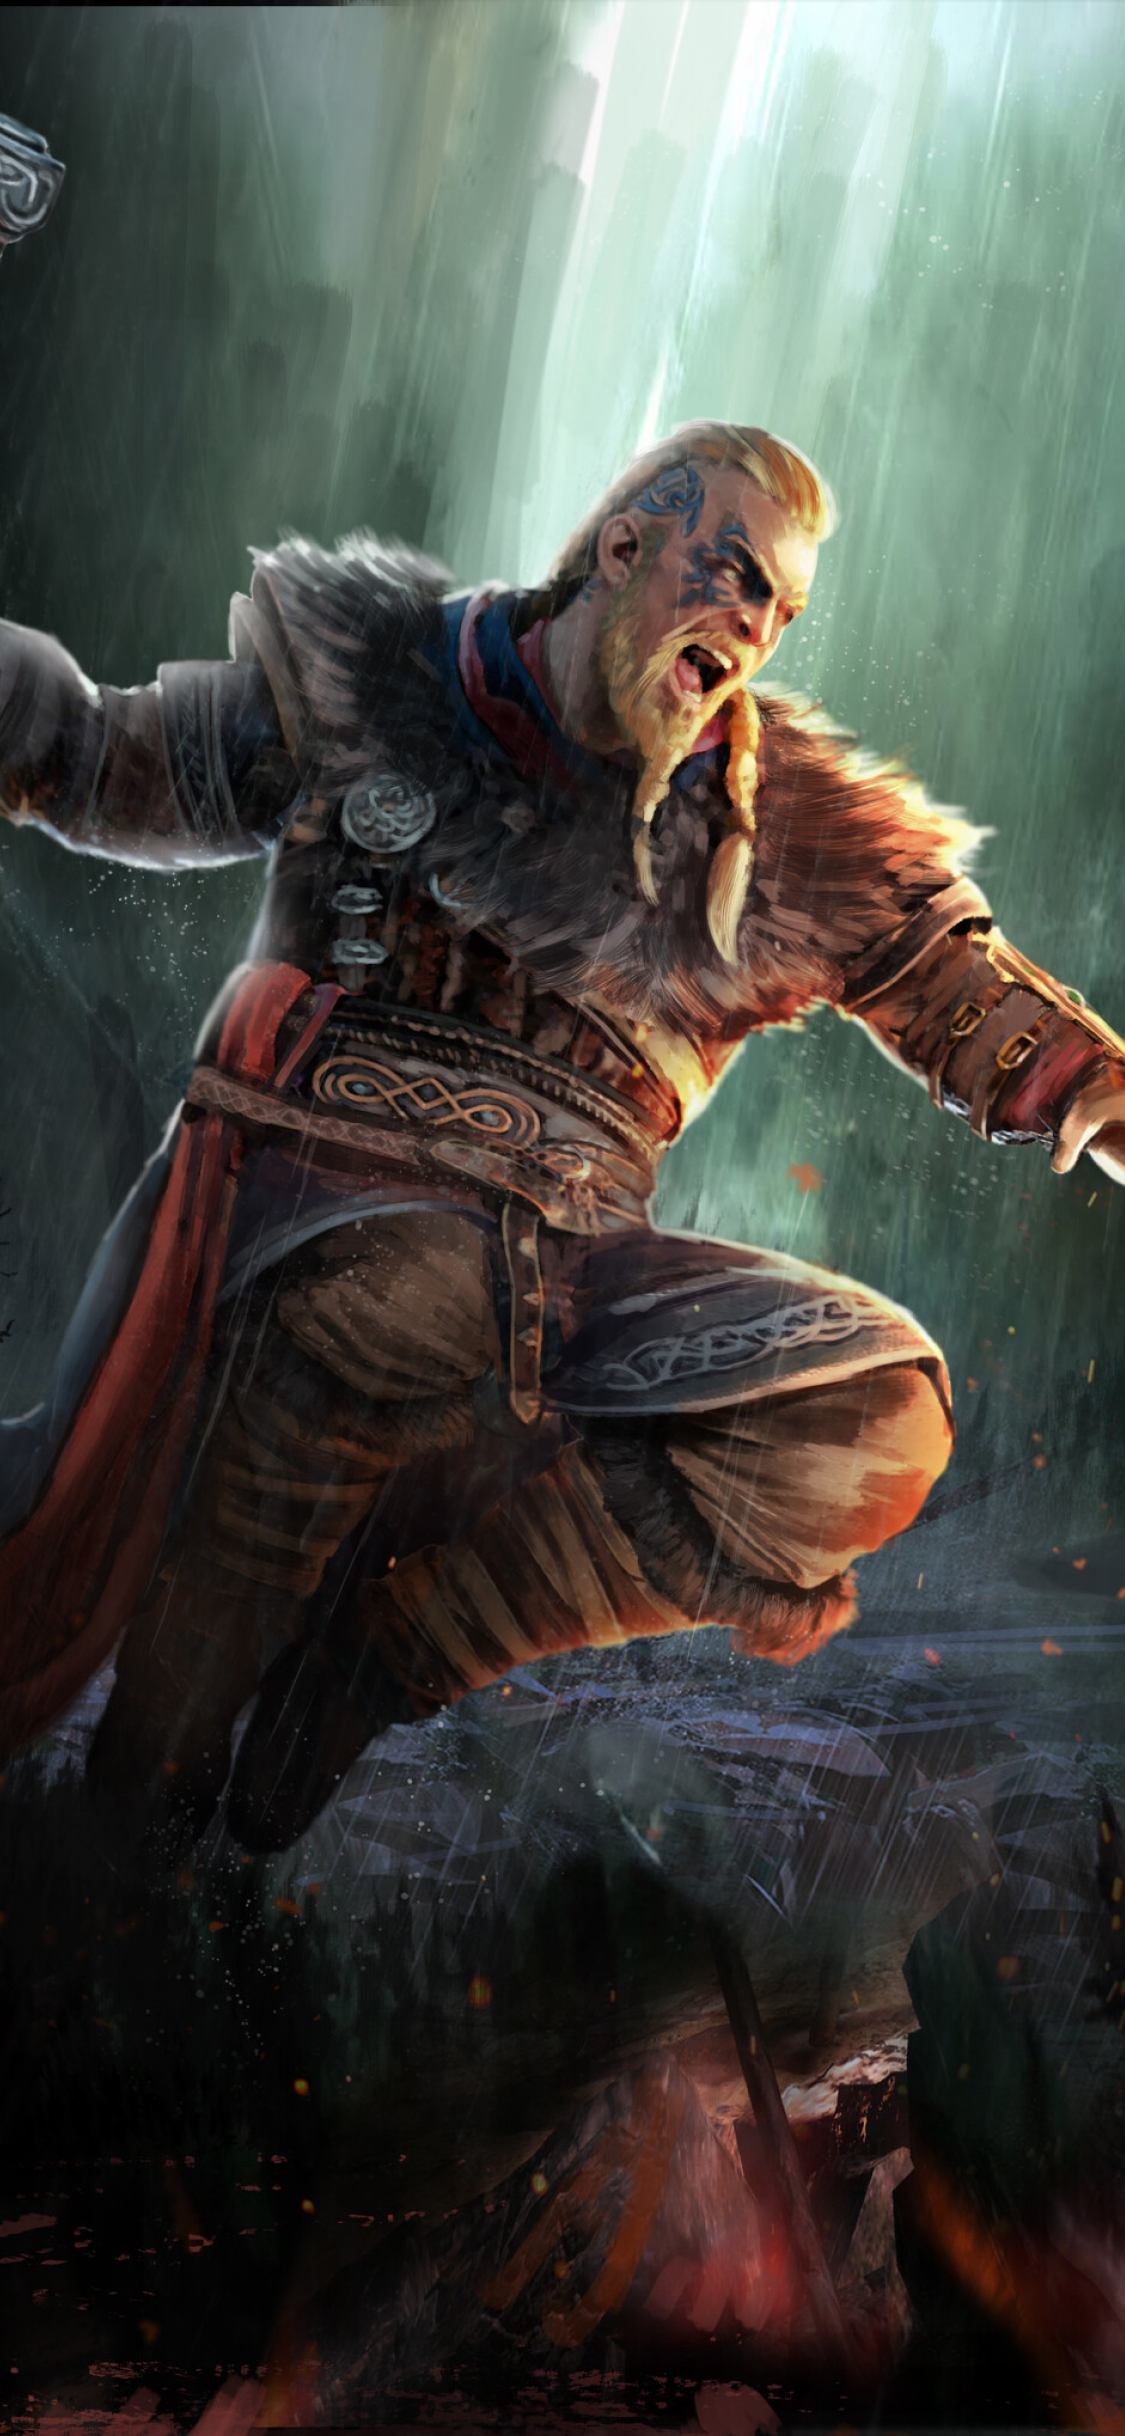 1125x2436 Assassin's Creed Valhalla Male Viking Warrior Iphone XS ...